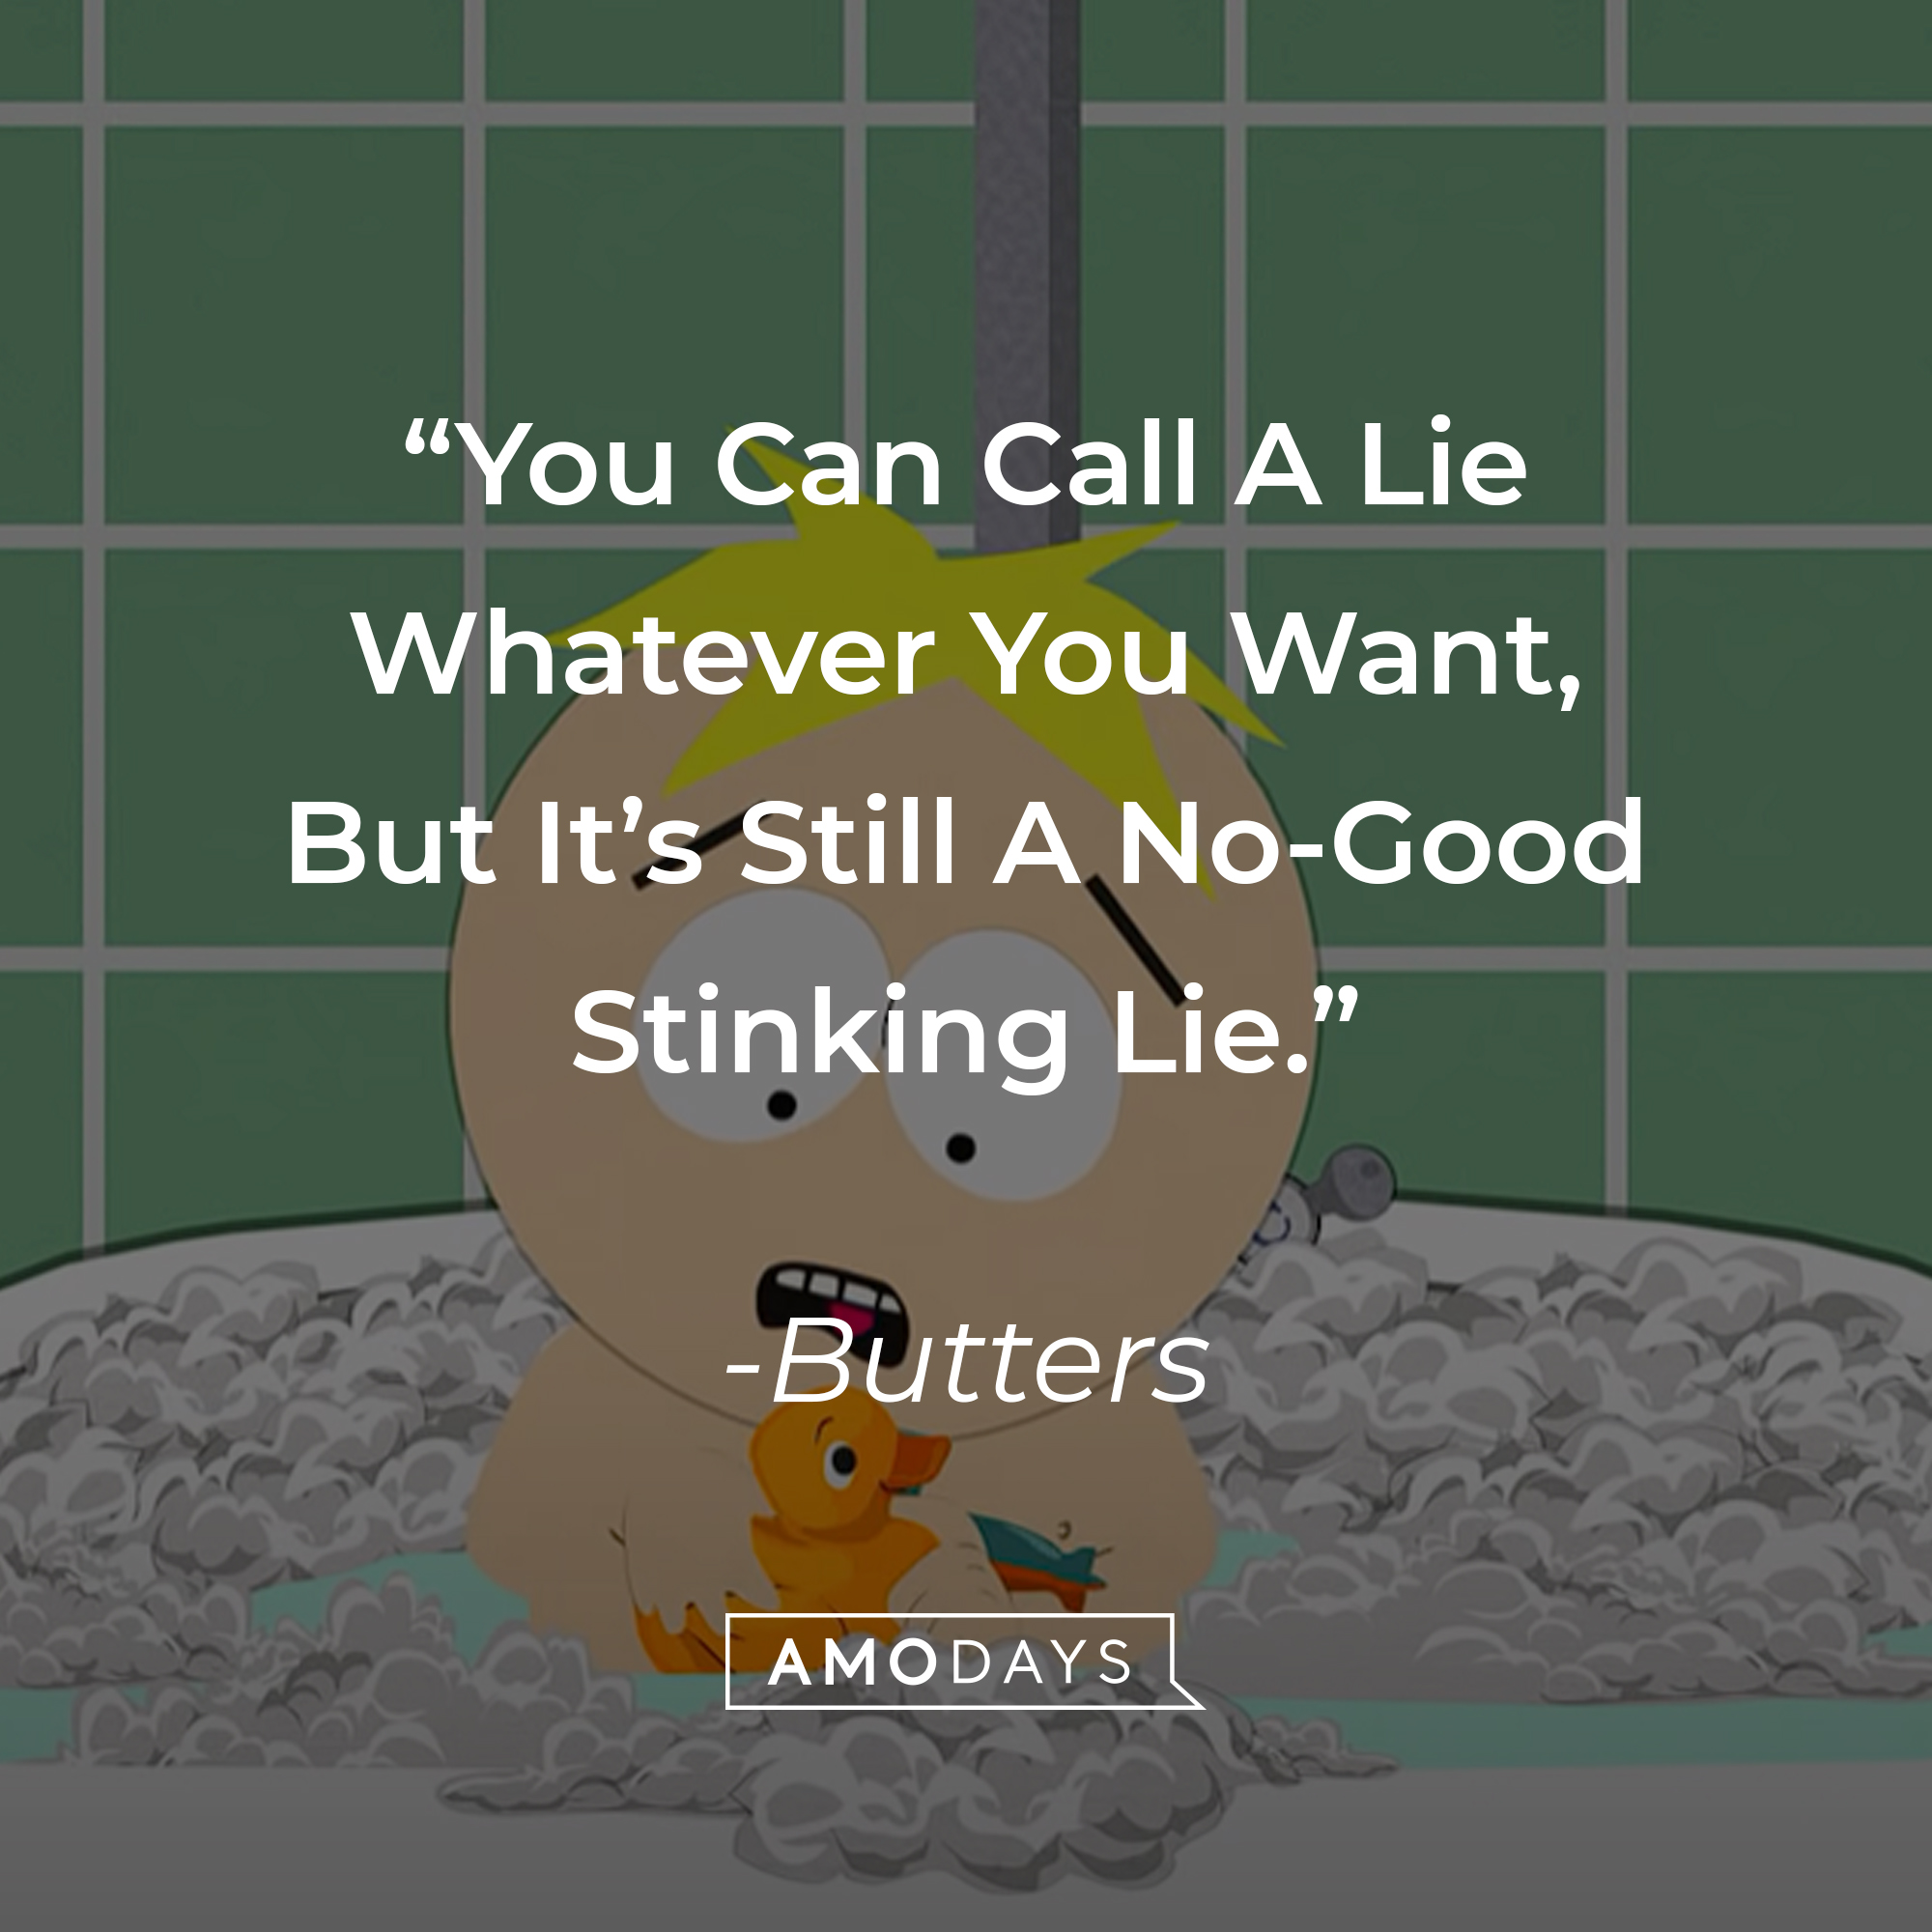 Butters' quote: "You Can Call A Lie Whatever You Want, But It's Still A No-Good Stinking Lie." | Source: youtube.com/southpark